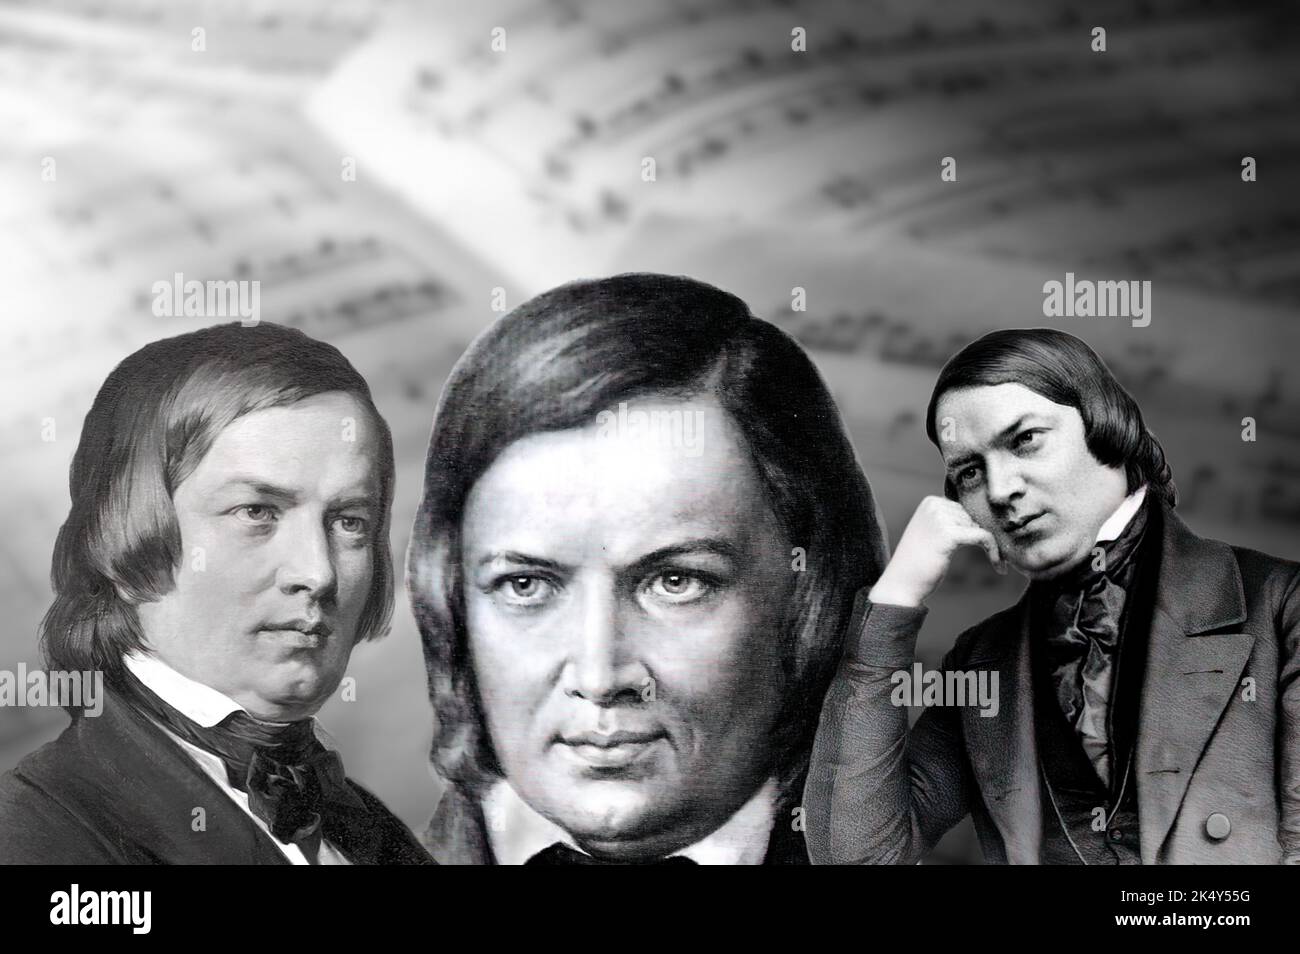 Robert Schumann (Alexander) was a German composer, pianist, considered one of the initiators of musical romanticism Stock Photo